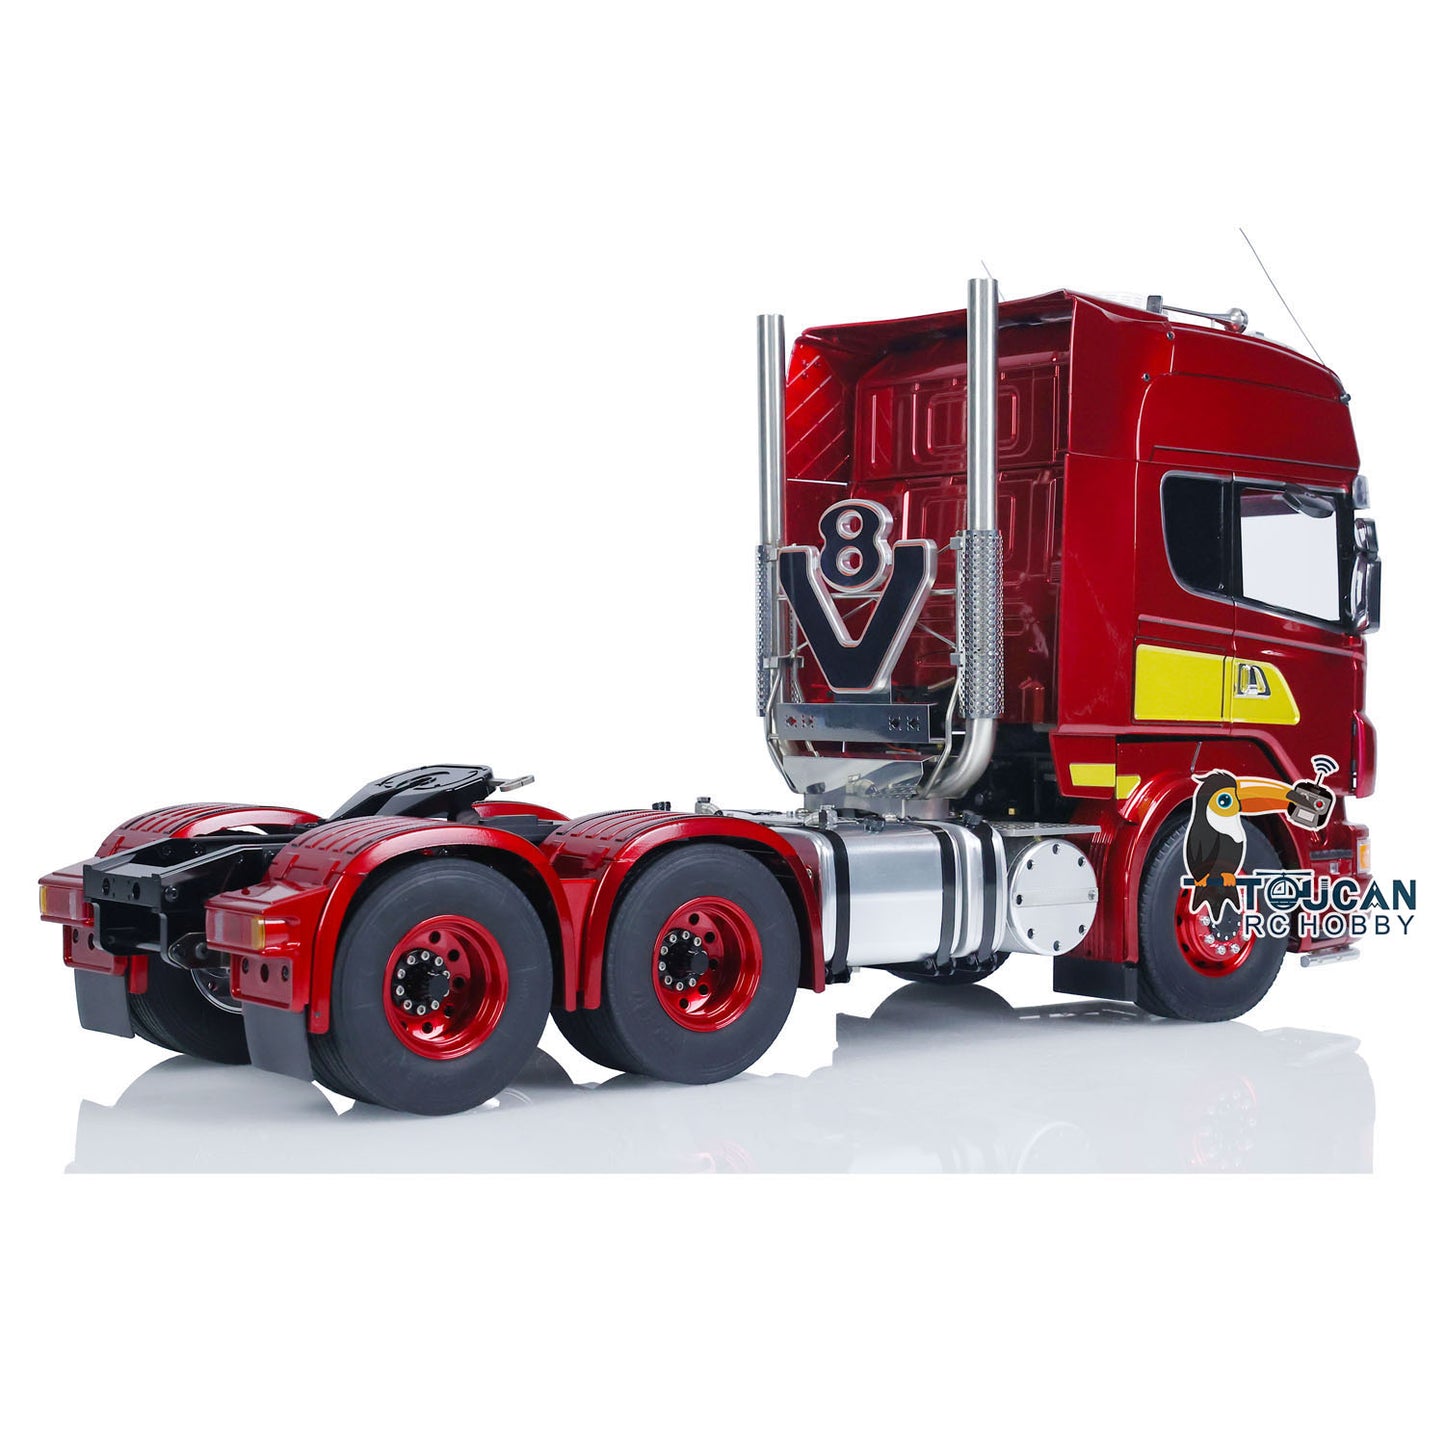 IN STOCK LESU 1/14 6x6 RC Tractor Truck Remote Controlled Trailer Toy Car 2-speed Gearbox Metal Chassis Hobby Model Servo ESC